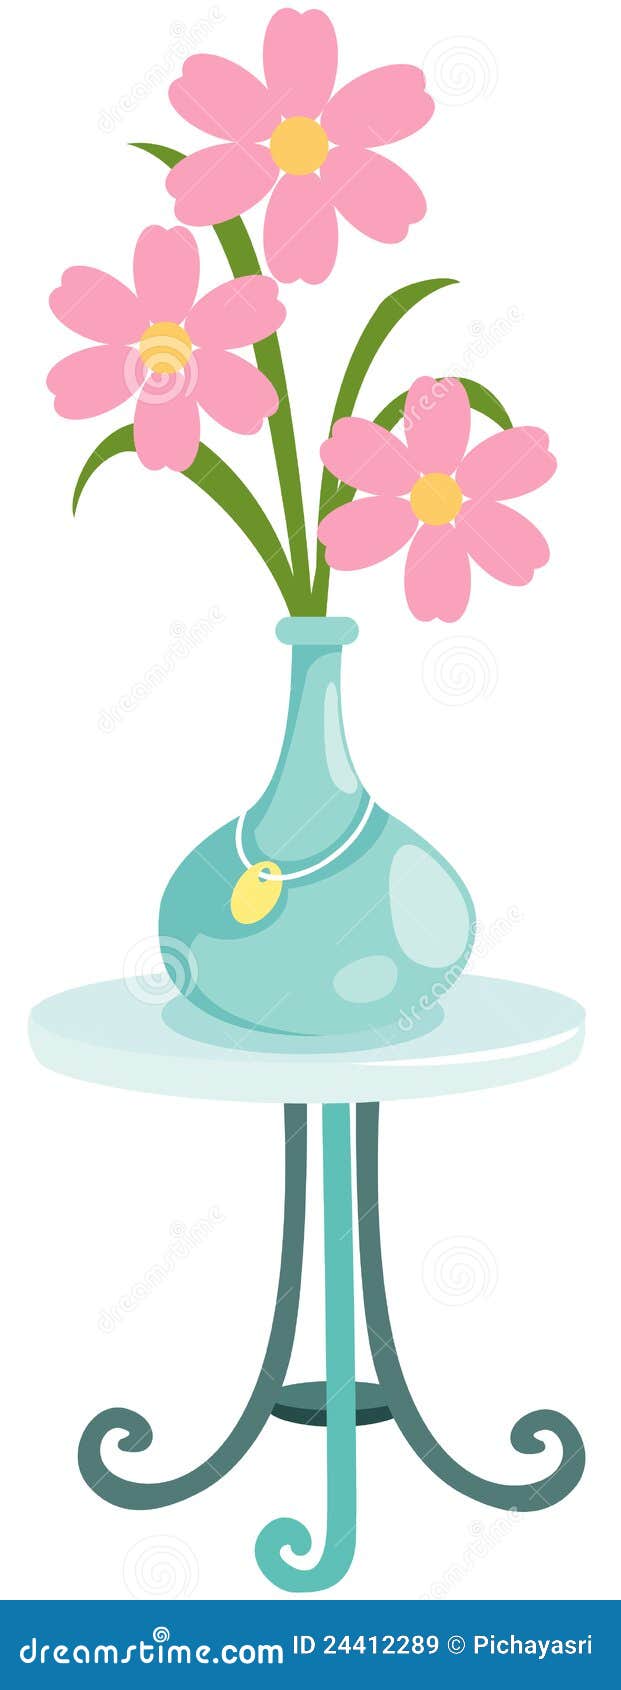 Flower In Vase On Glass Table Royalty Free Stock Images - Image 